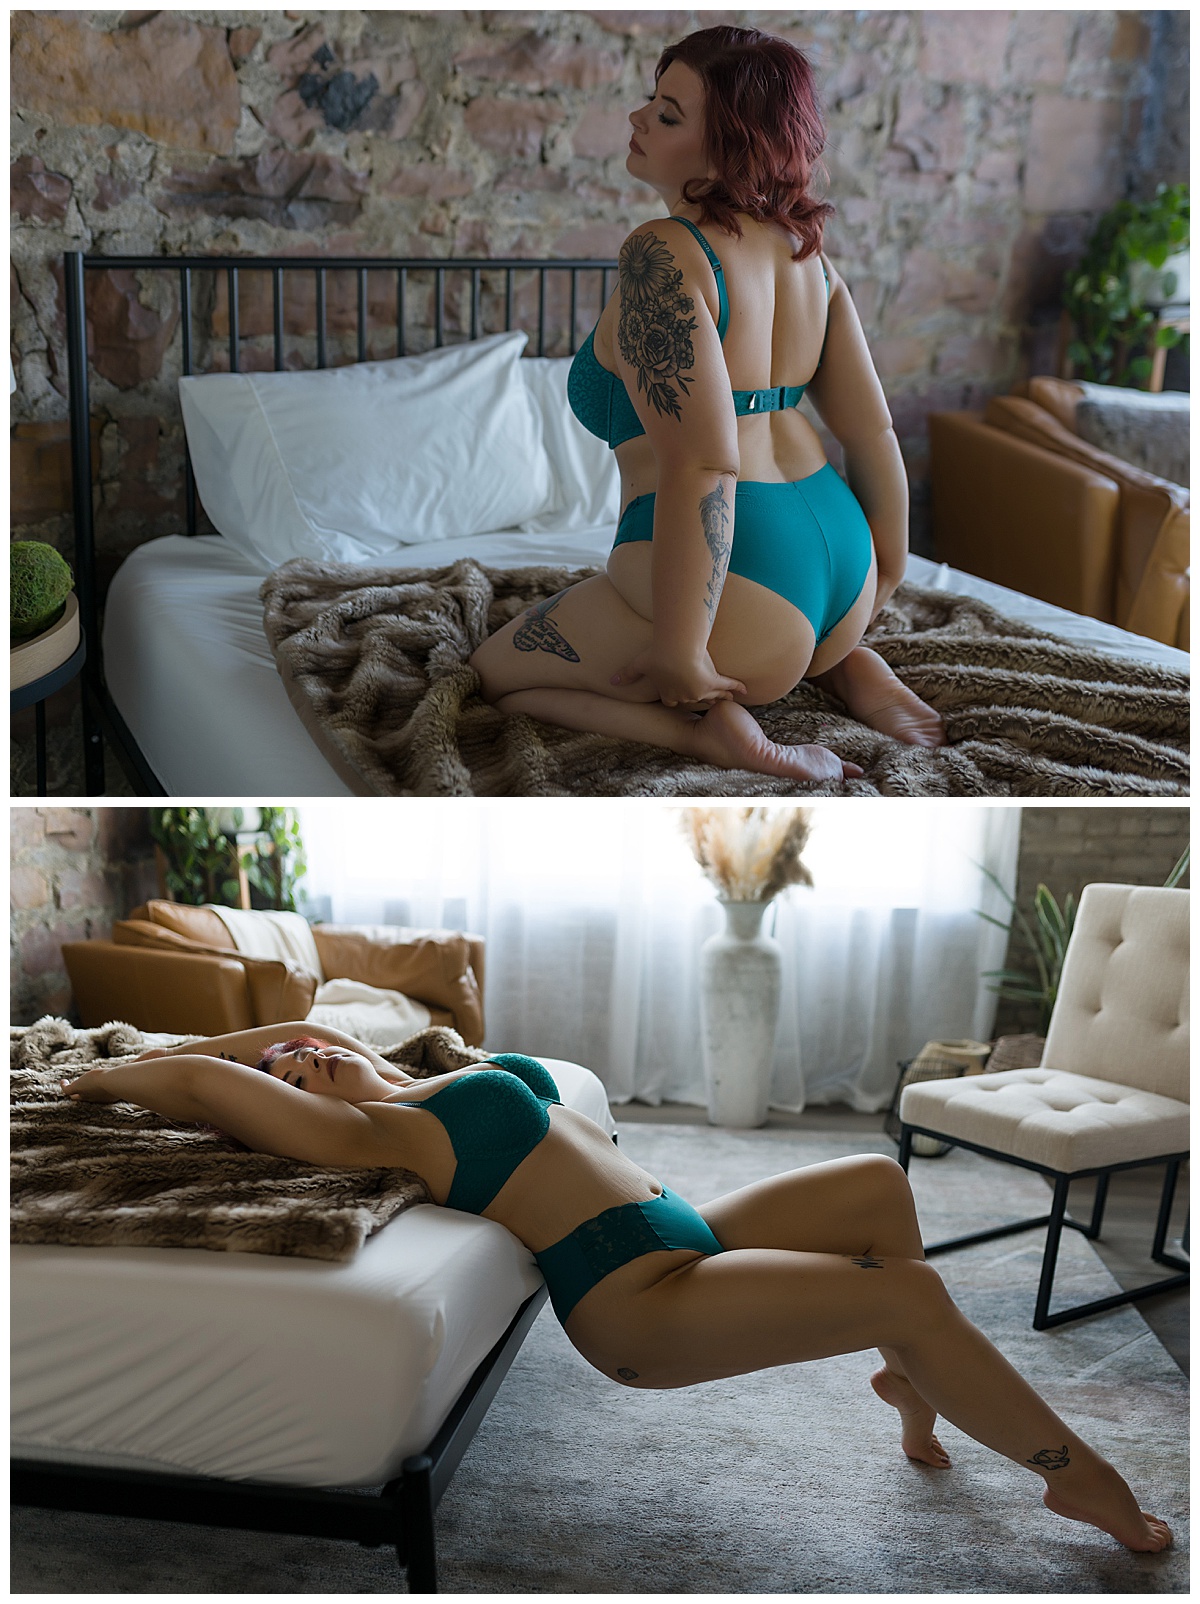 Female kneels and leans back over bed to feel encouraged and empowered